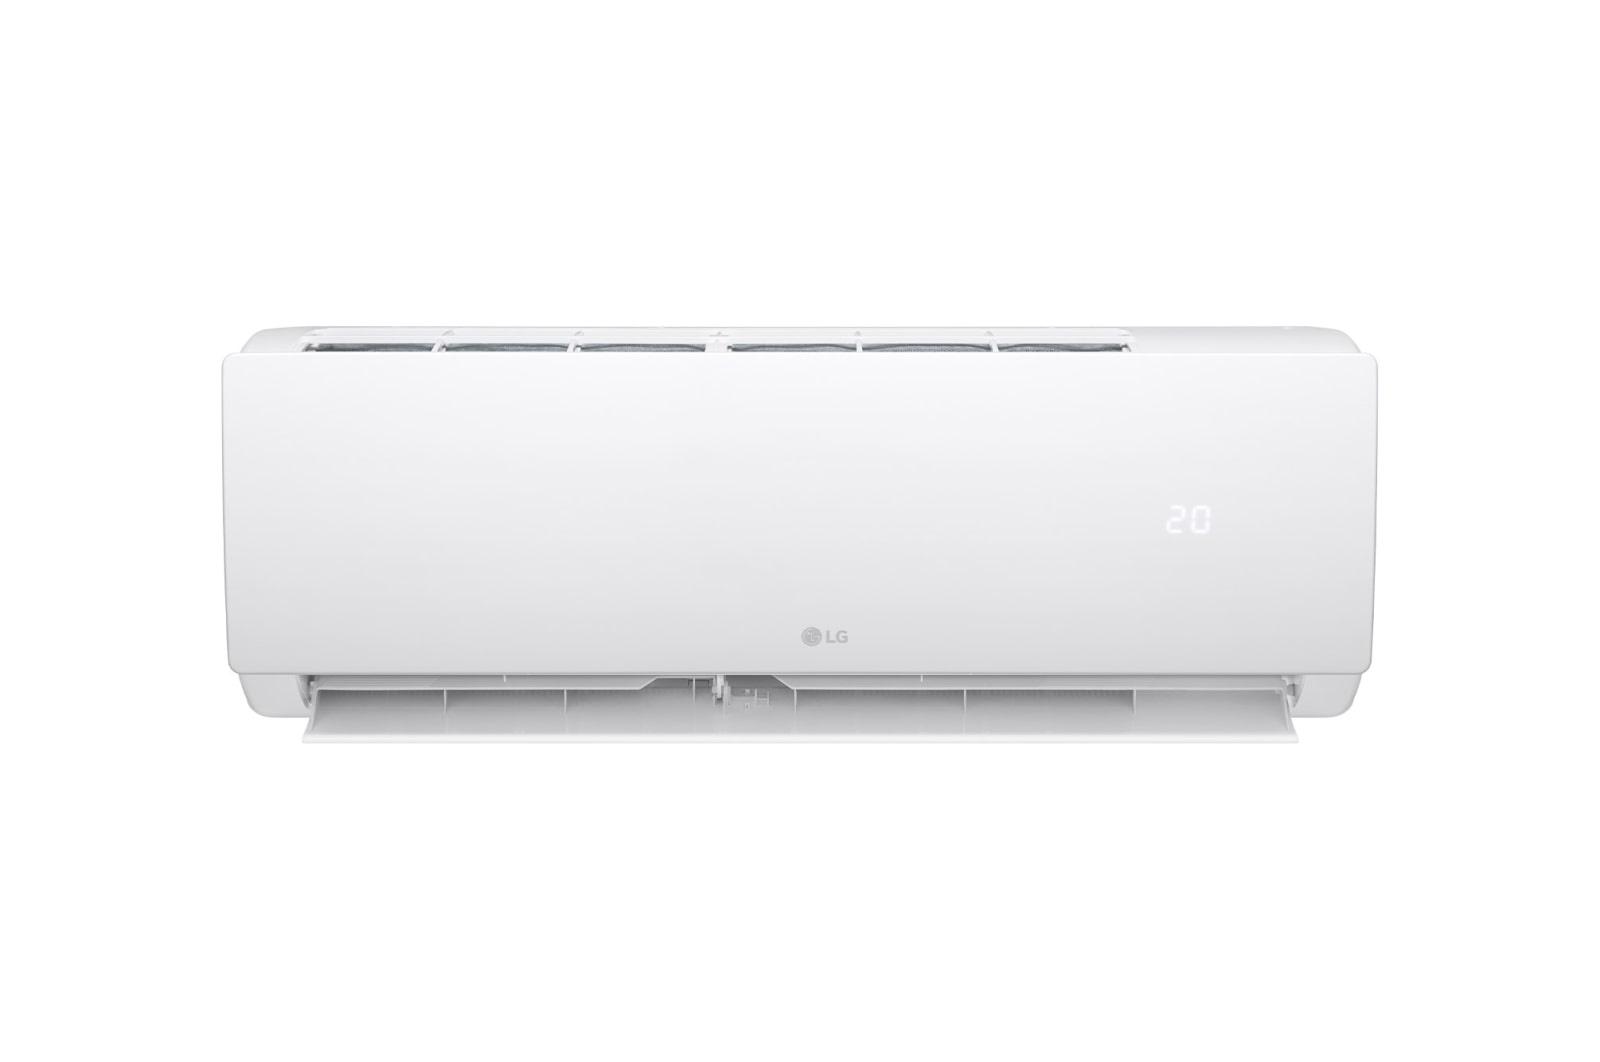 LG Hero Split Air Conditioner, 1.5HP, Cooling and Heating, Inverter Motor, White - S4-H12TZAAE